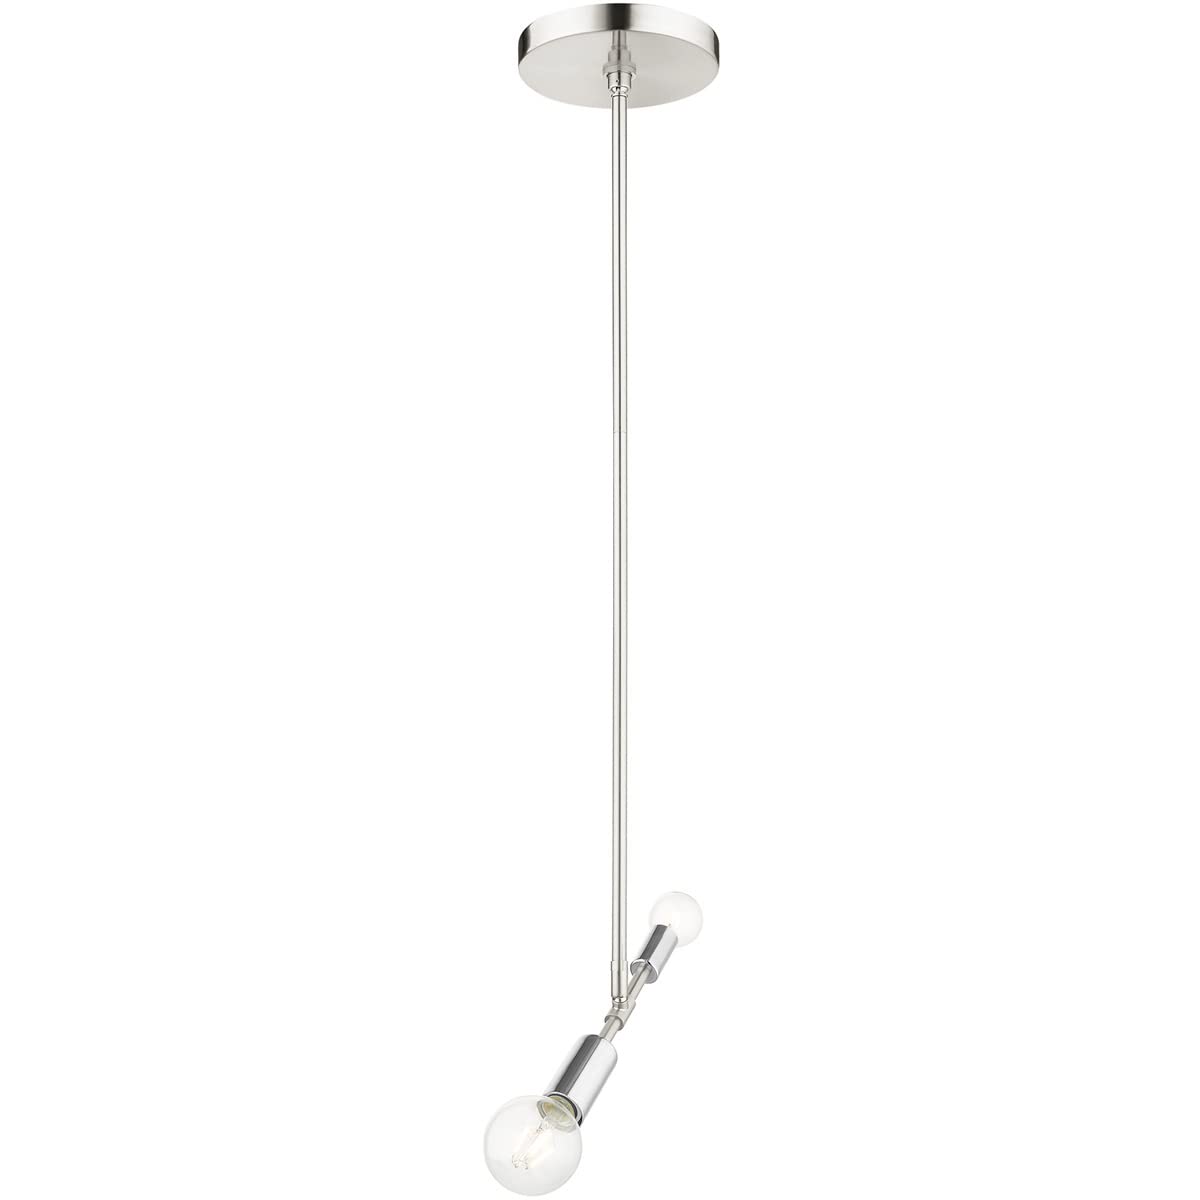 Livex 46432-91 Transitional One Light Pendant from Blairwood Collection in Pwt, Nckl, B/S, Slvr. Finish, 9.50 inches, Brushed Nickel